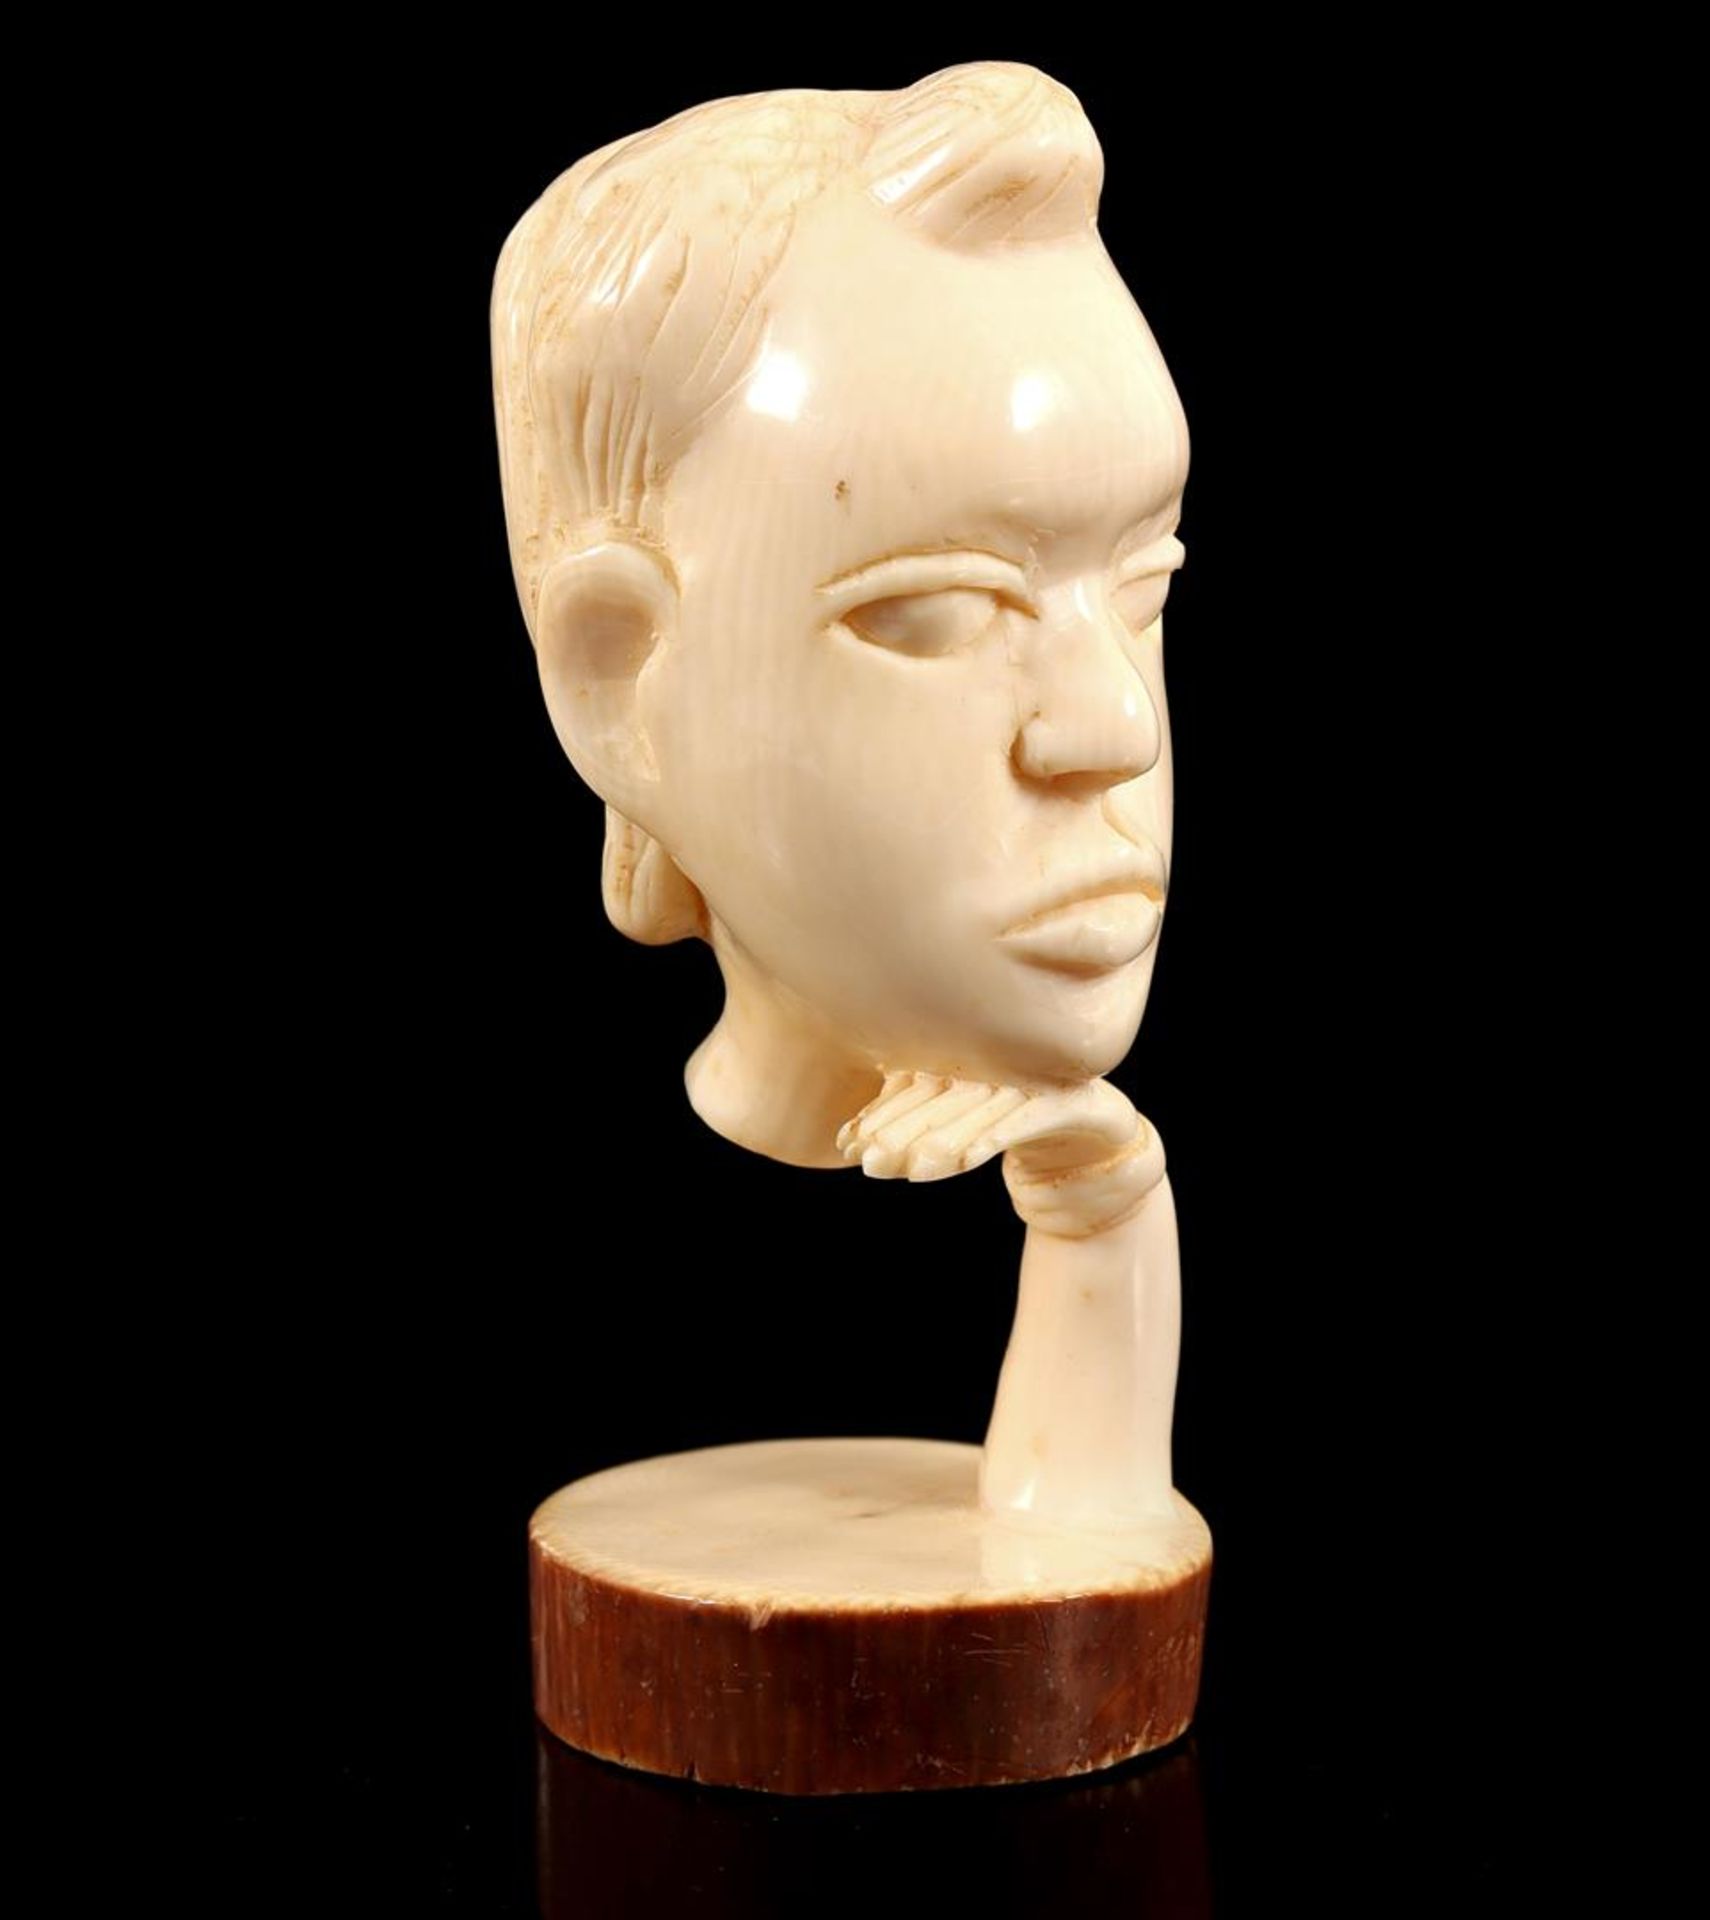 Carved ivory bust of a woman's face